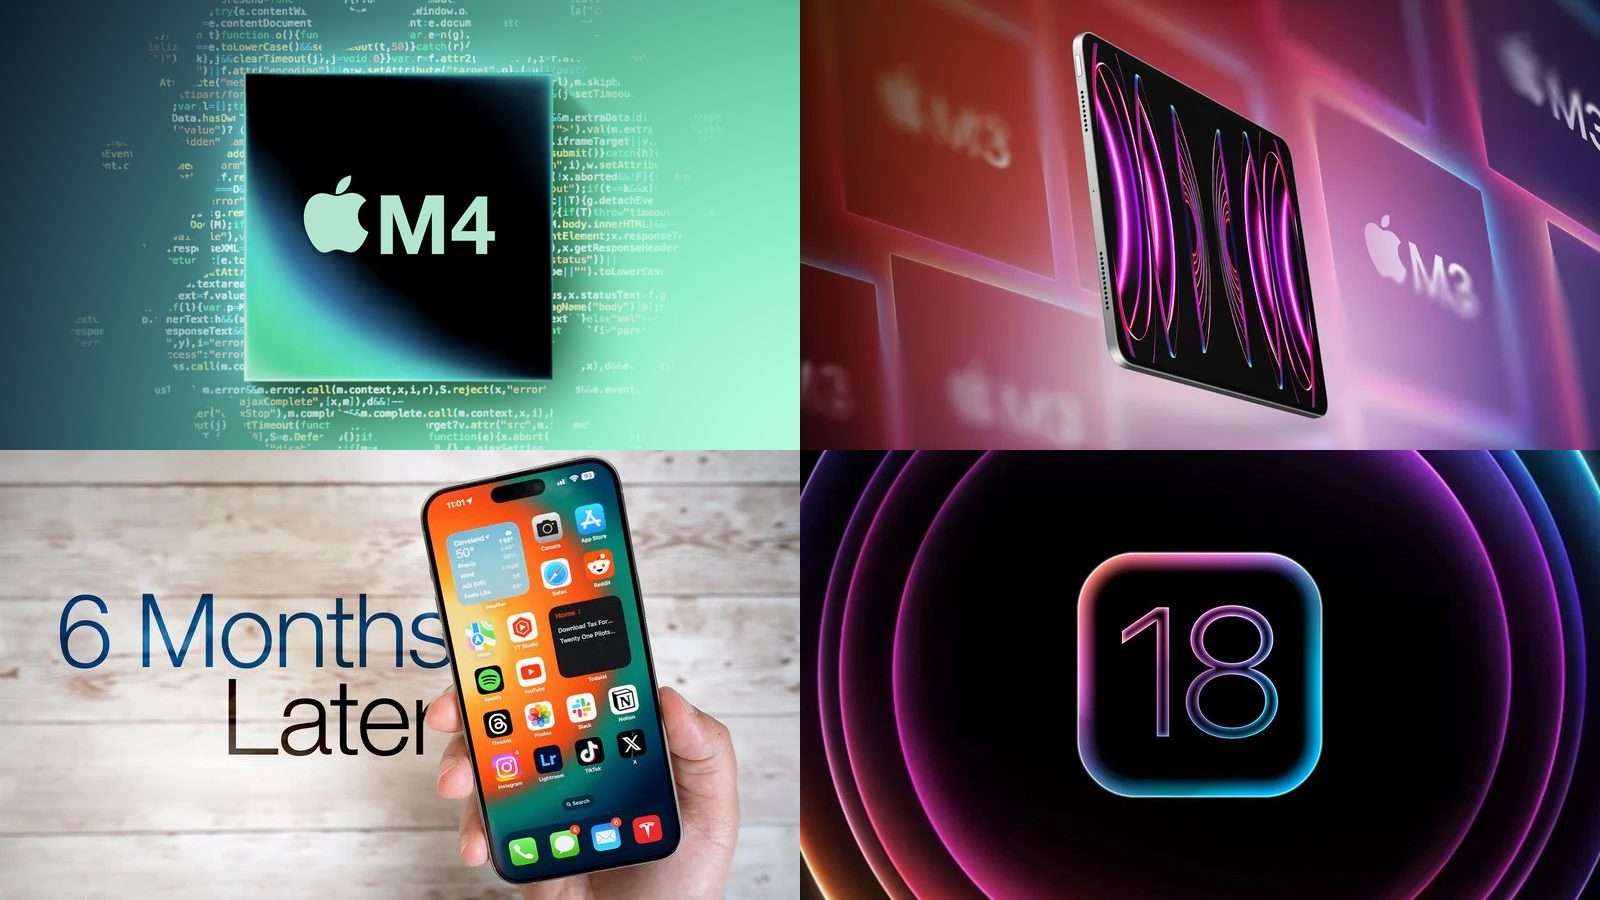 Top Stories: M4 Mac Roadmap Leaked, New iPads in Second Week of May, and More